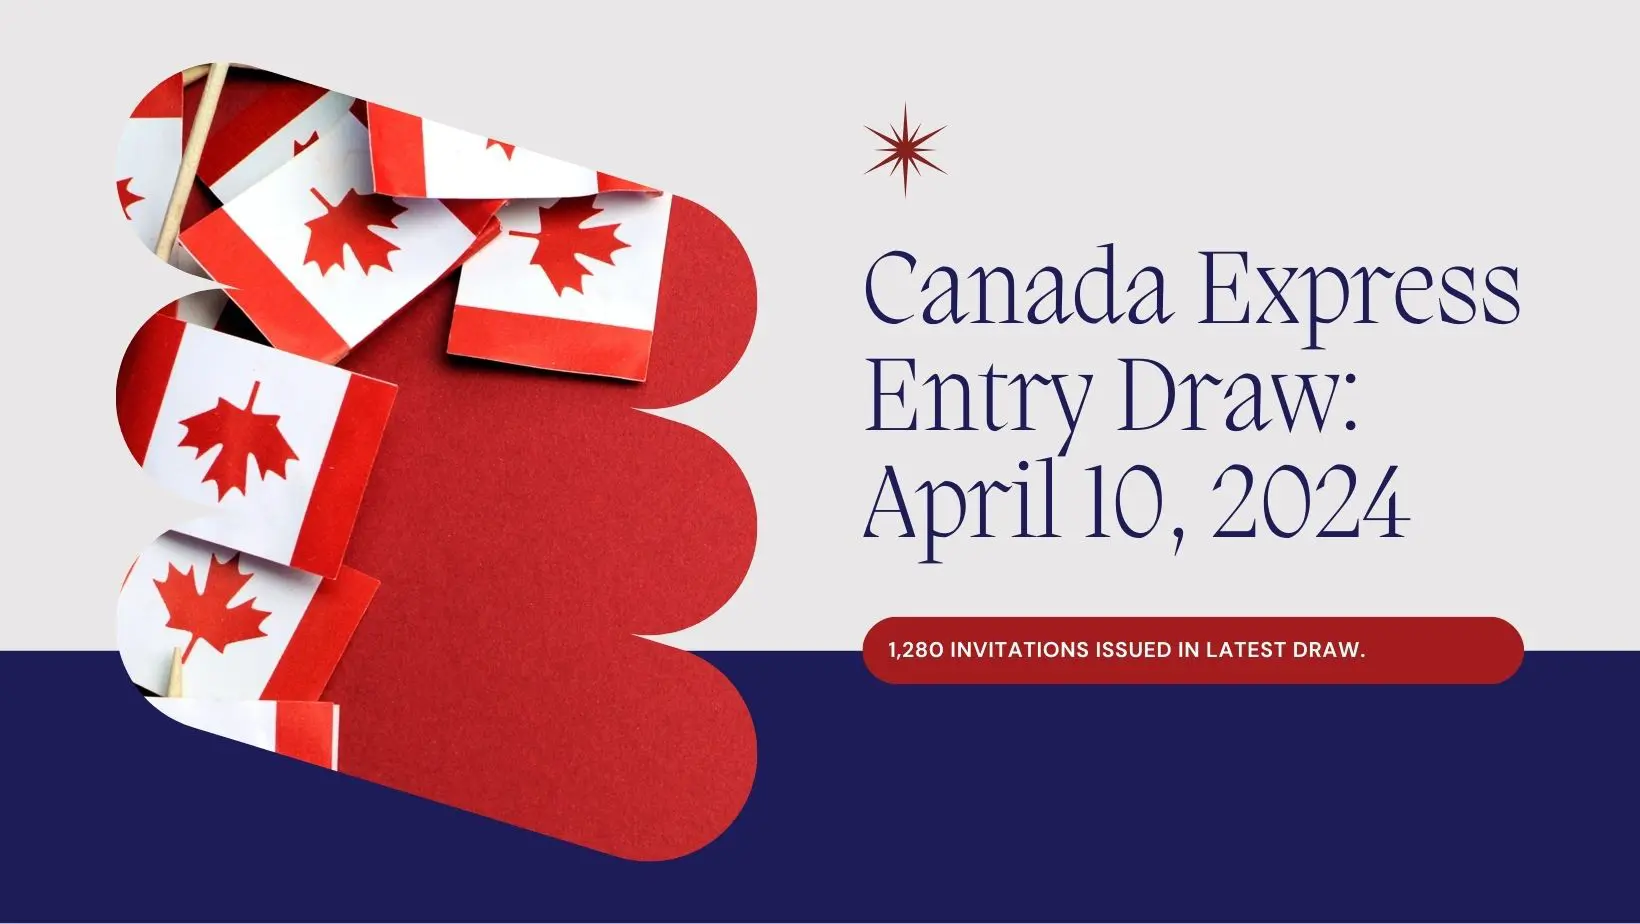 Canada Express Entry Draw on April 10, 2024: 1,280 Invitations Issued